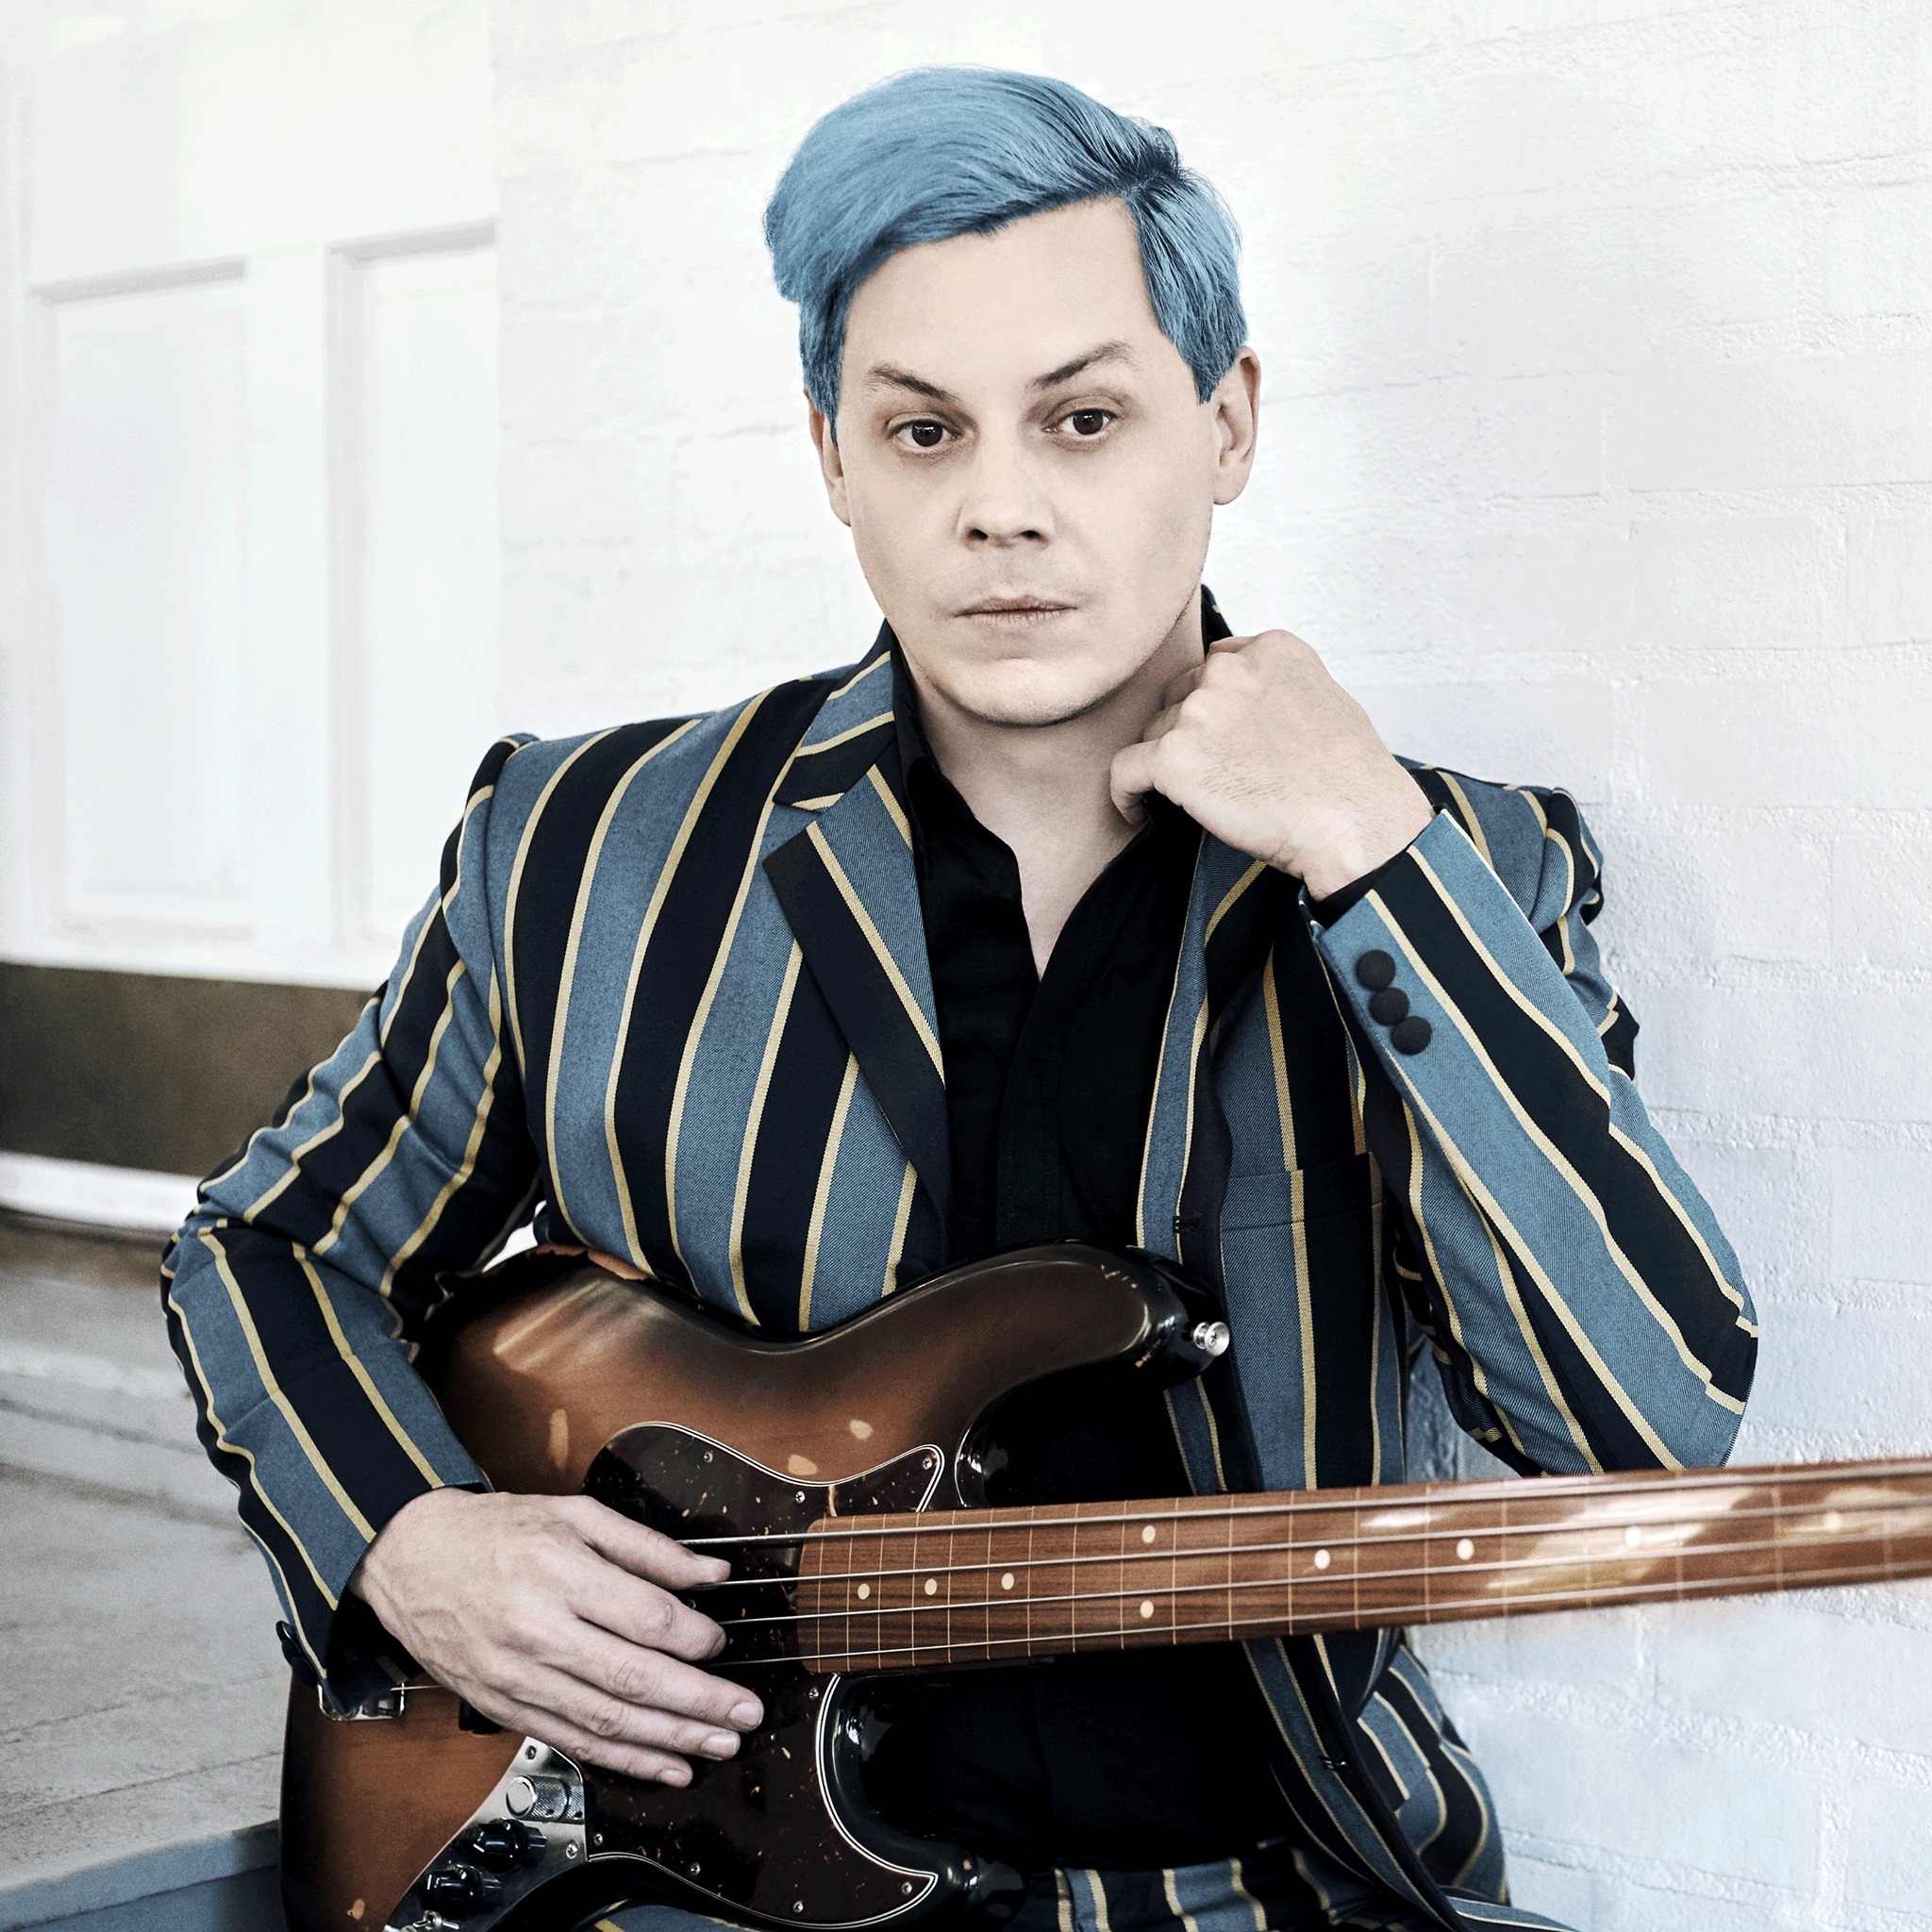 Jack White Releases Two Dramatically Different Versions of New Single “Taking Me Back”